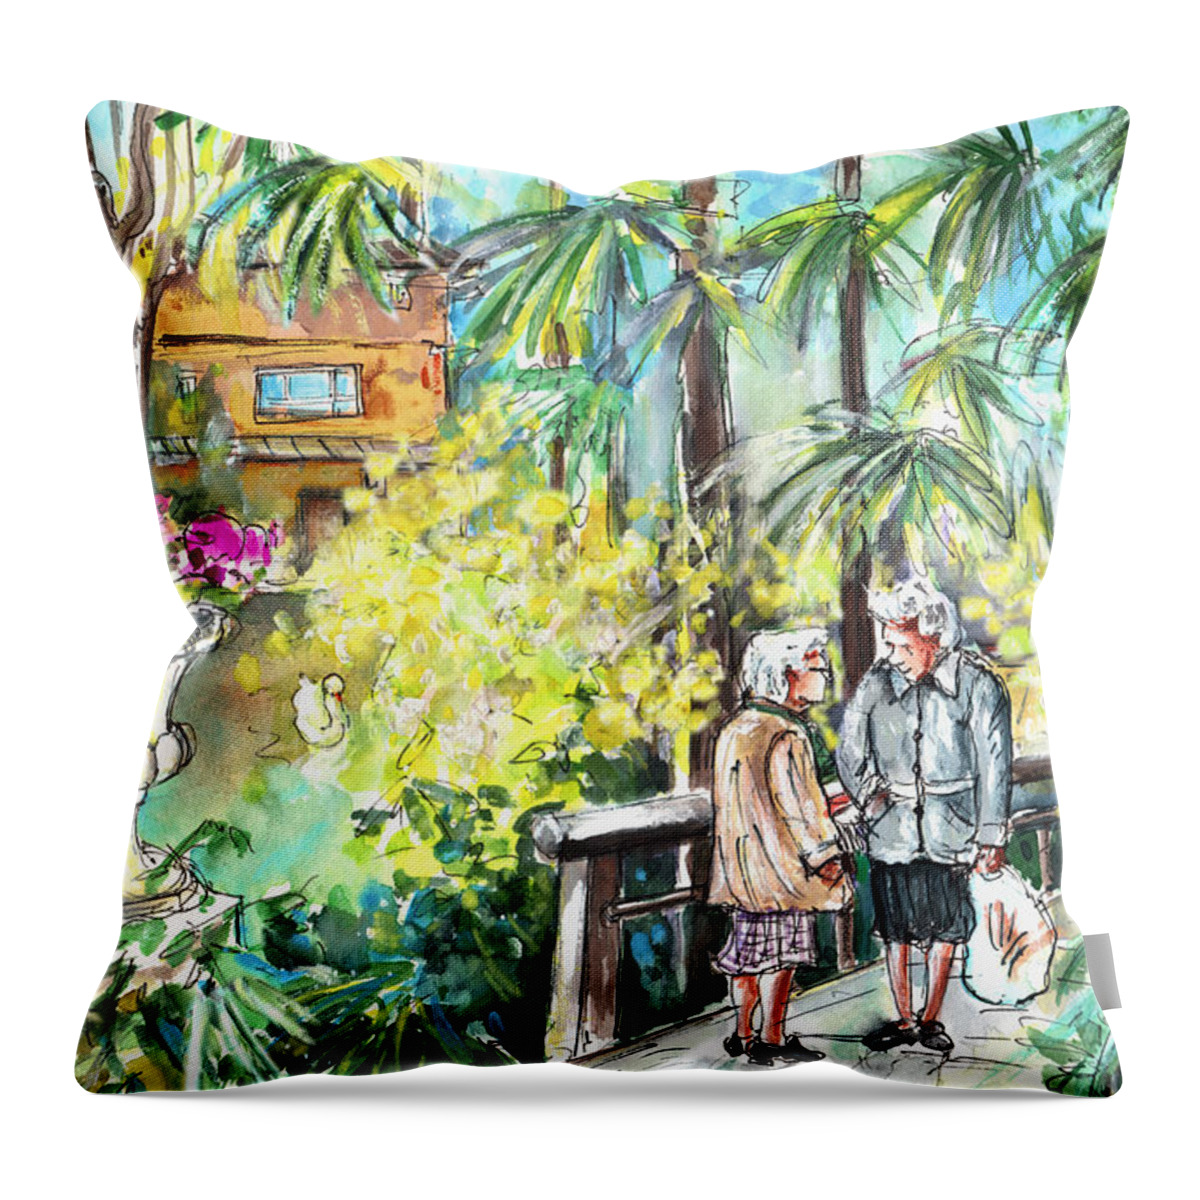 Travel Throw Pillow featuring the painting In The Park In Bergamo by Miki De Goodaboom